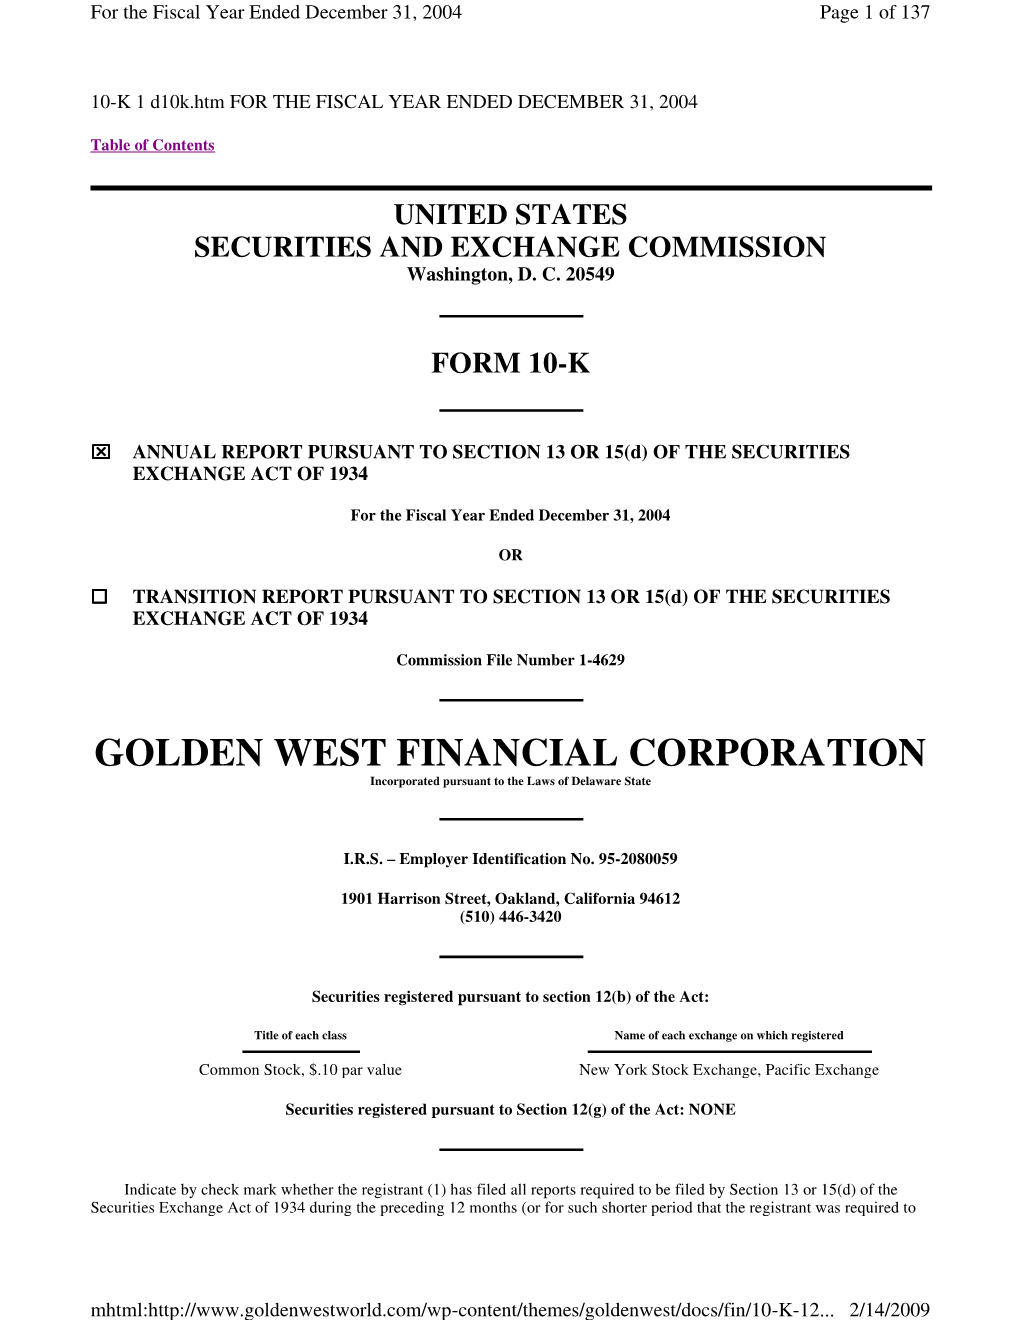 GOLDEN WEST FINANCIAL CORPORATION Incorporated Pursuant to the Laws of Delaware State